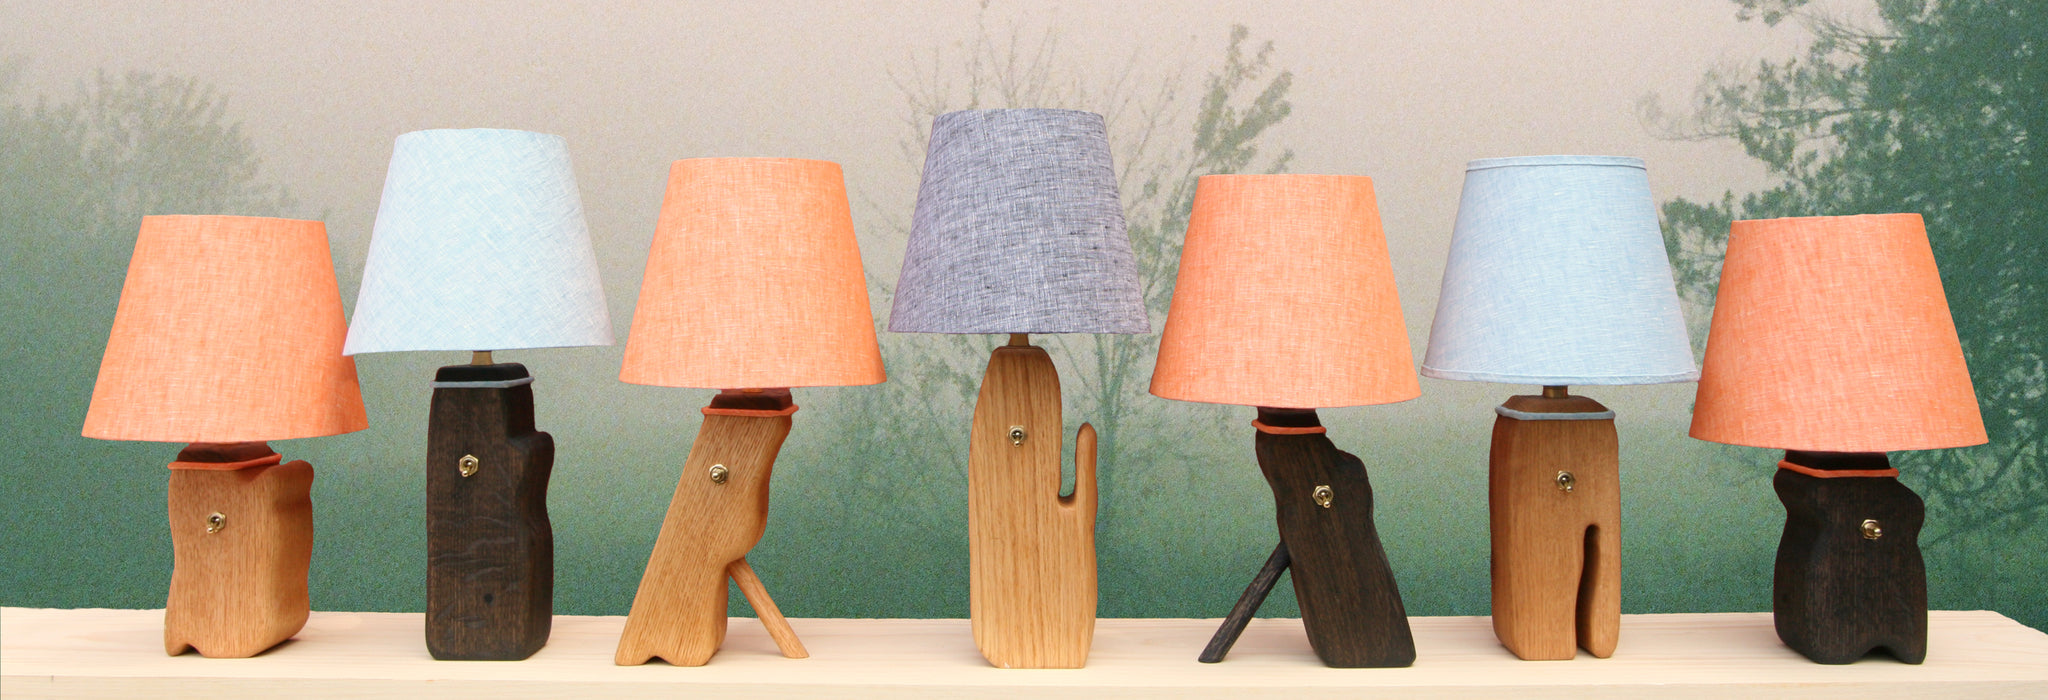 Log lamp collection, set of 7